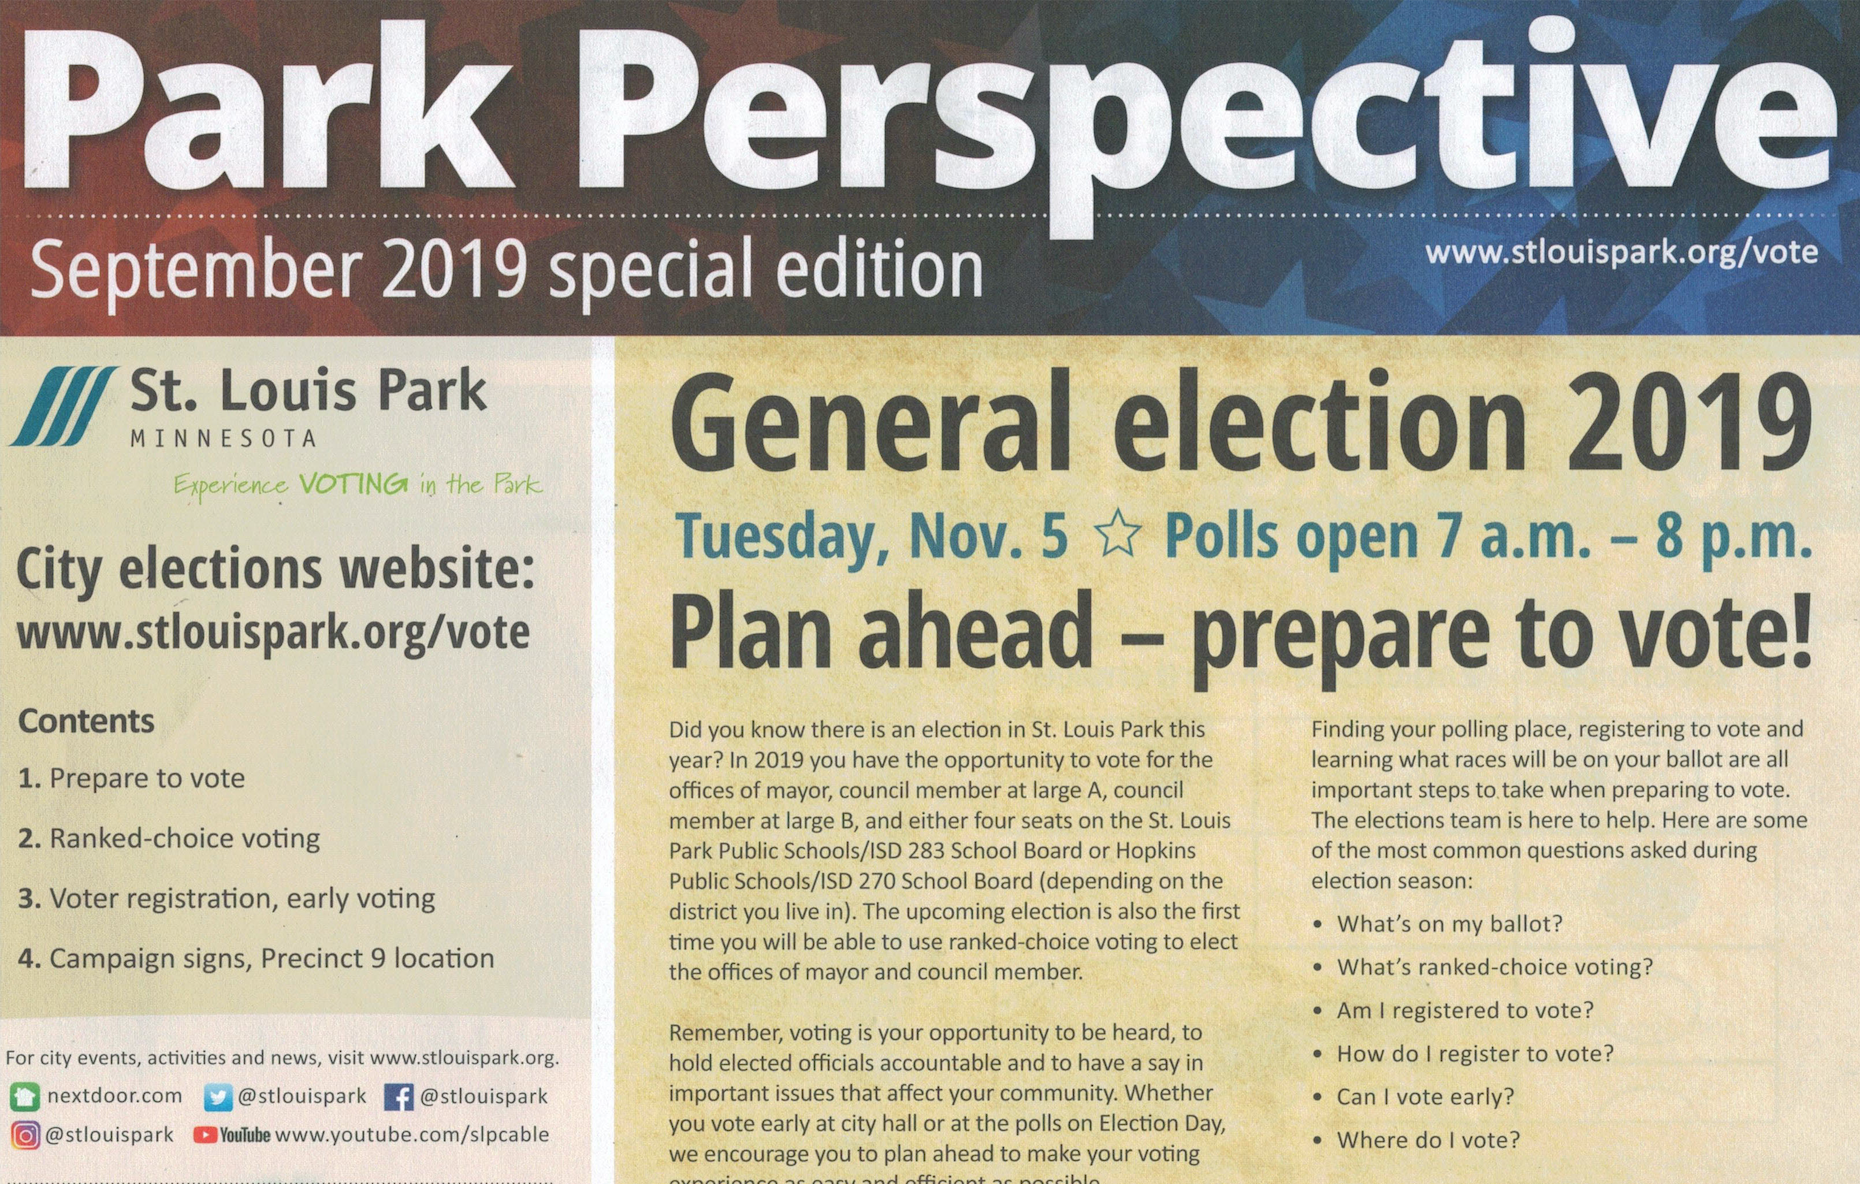 Front page of the newsletter for September 2019 special edition